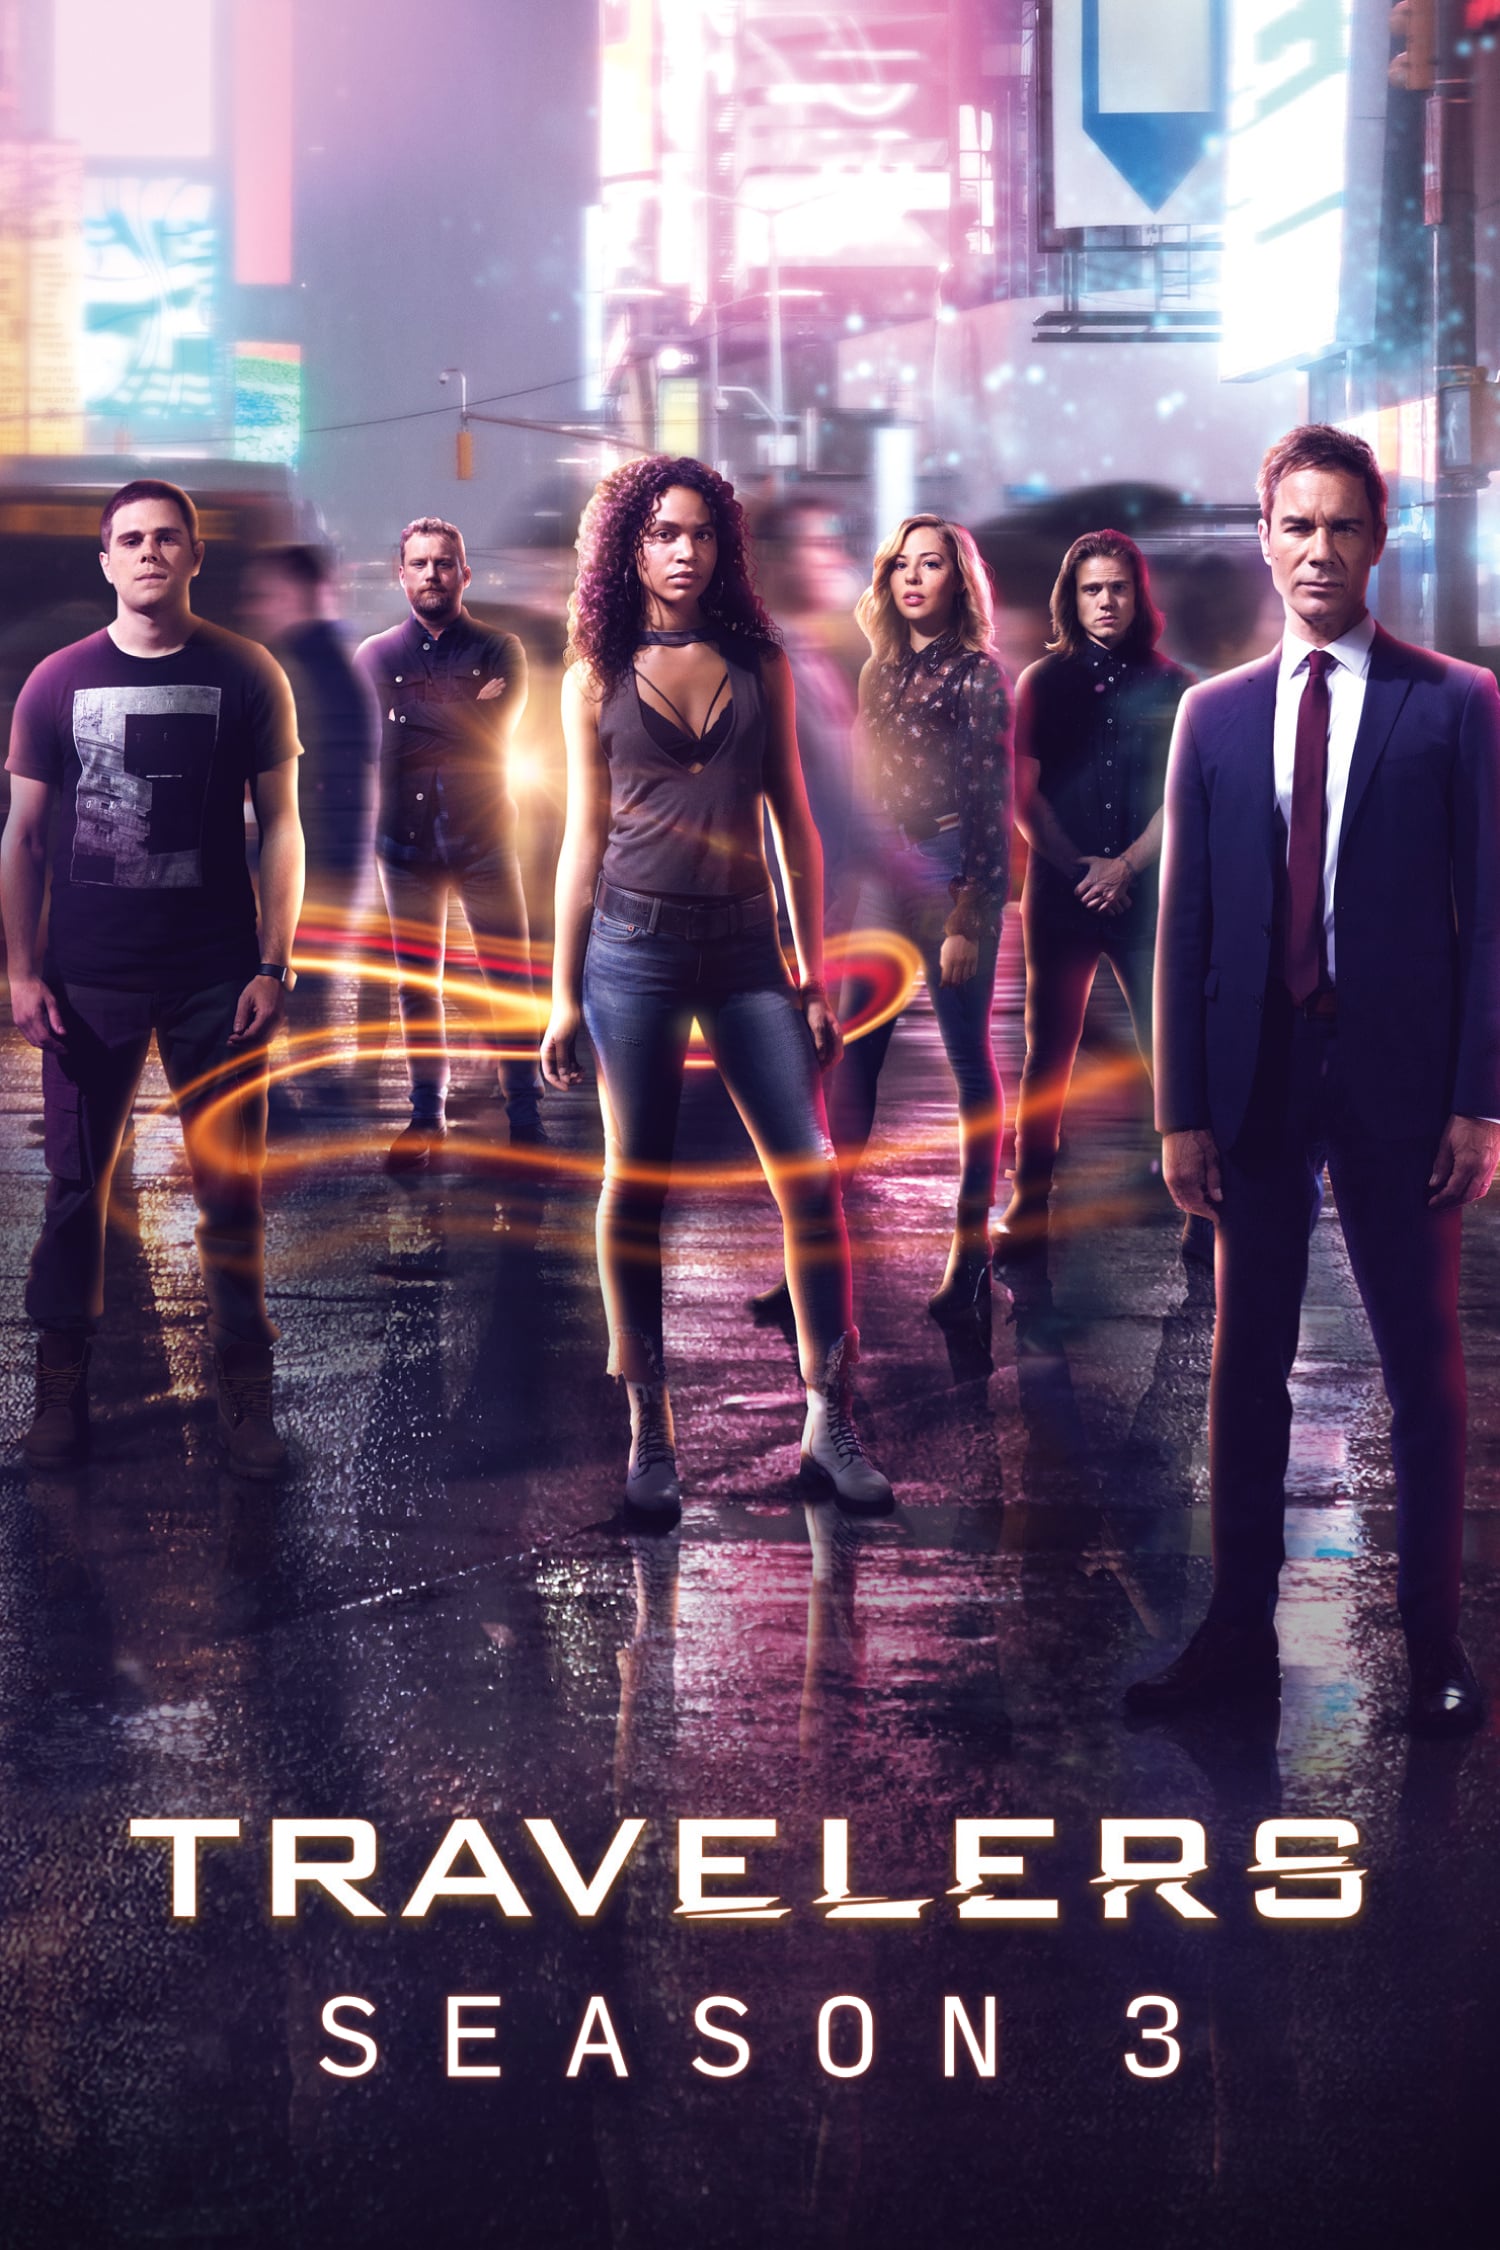 Travelers Season 4 Release Date, Time & Details Tonights.TV